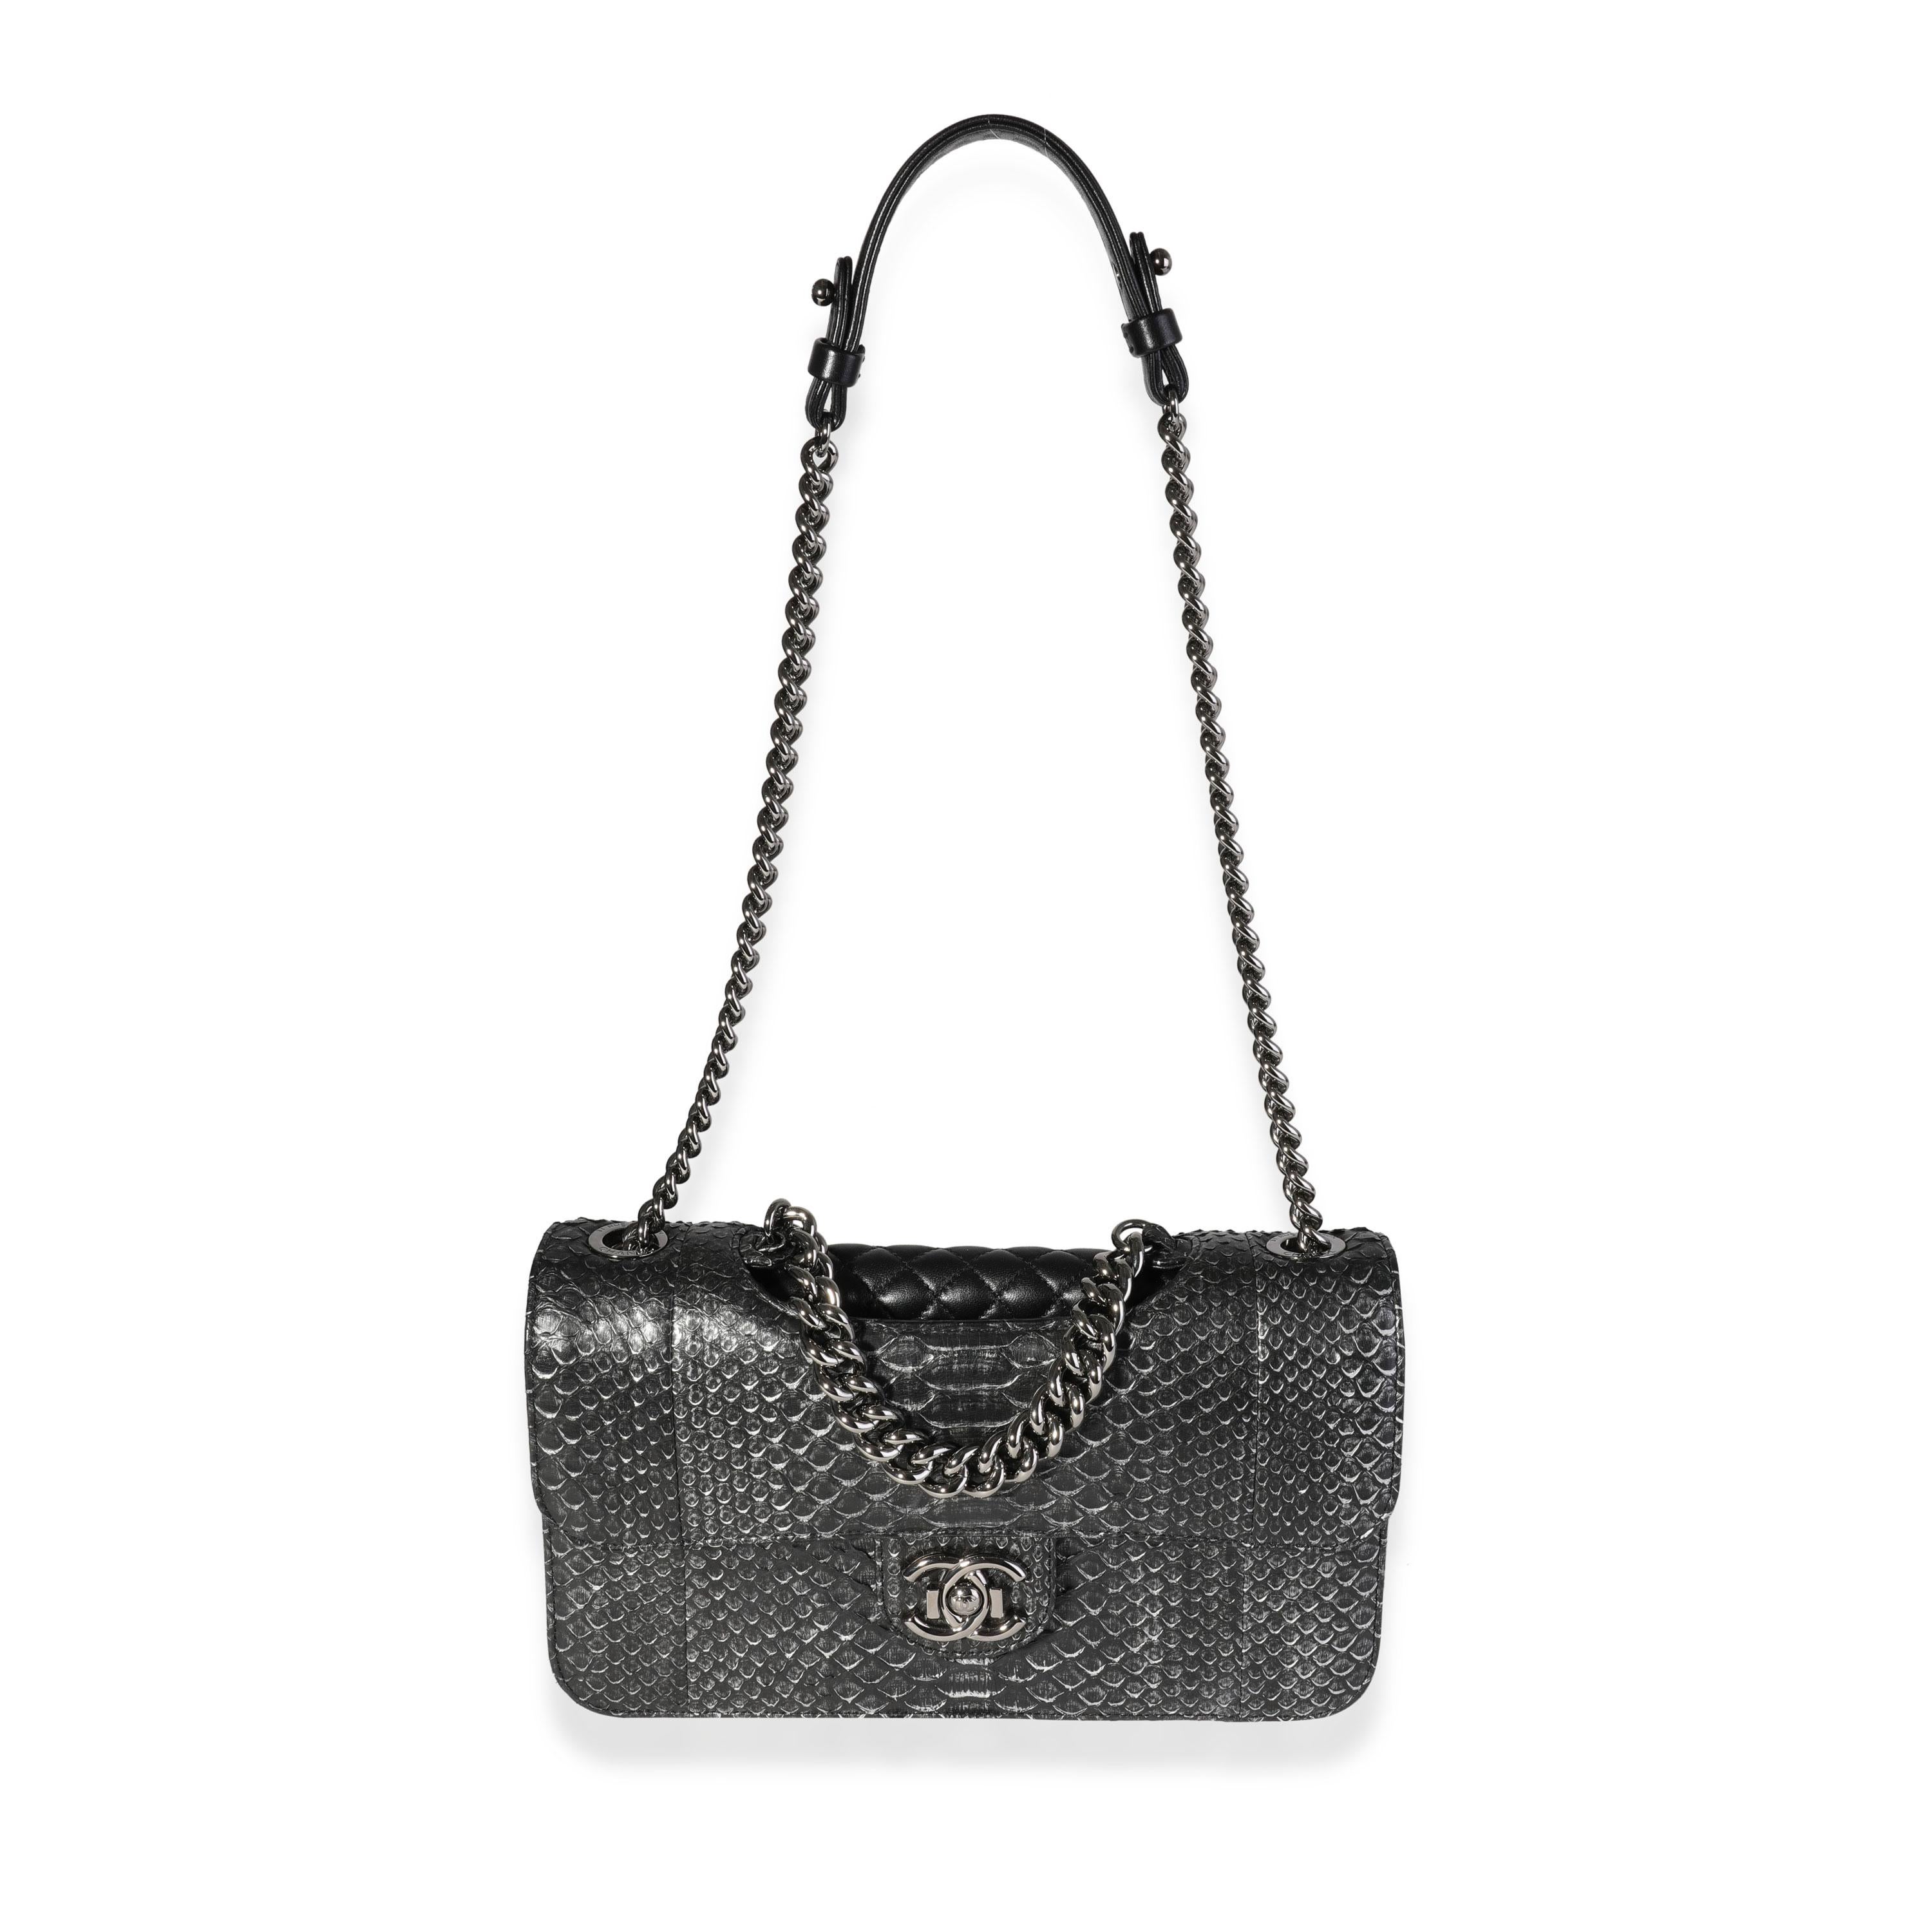 Listing Title: Chanel Black Python Pondicherry Flap Bag
SKU: 119207
Condition: Pre-owned (3000)
Handbag Condition: Never Worn
Condition Comments: Please note: this item can not be shipped to all areas.
Brand: Chanel
Model: Pondicherry
Origin